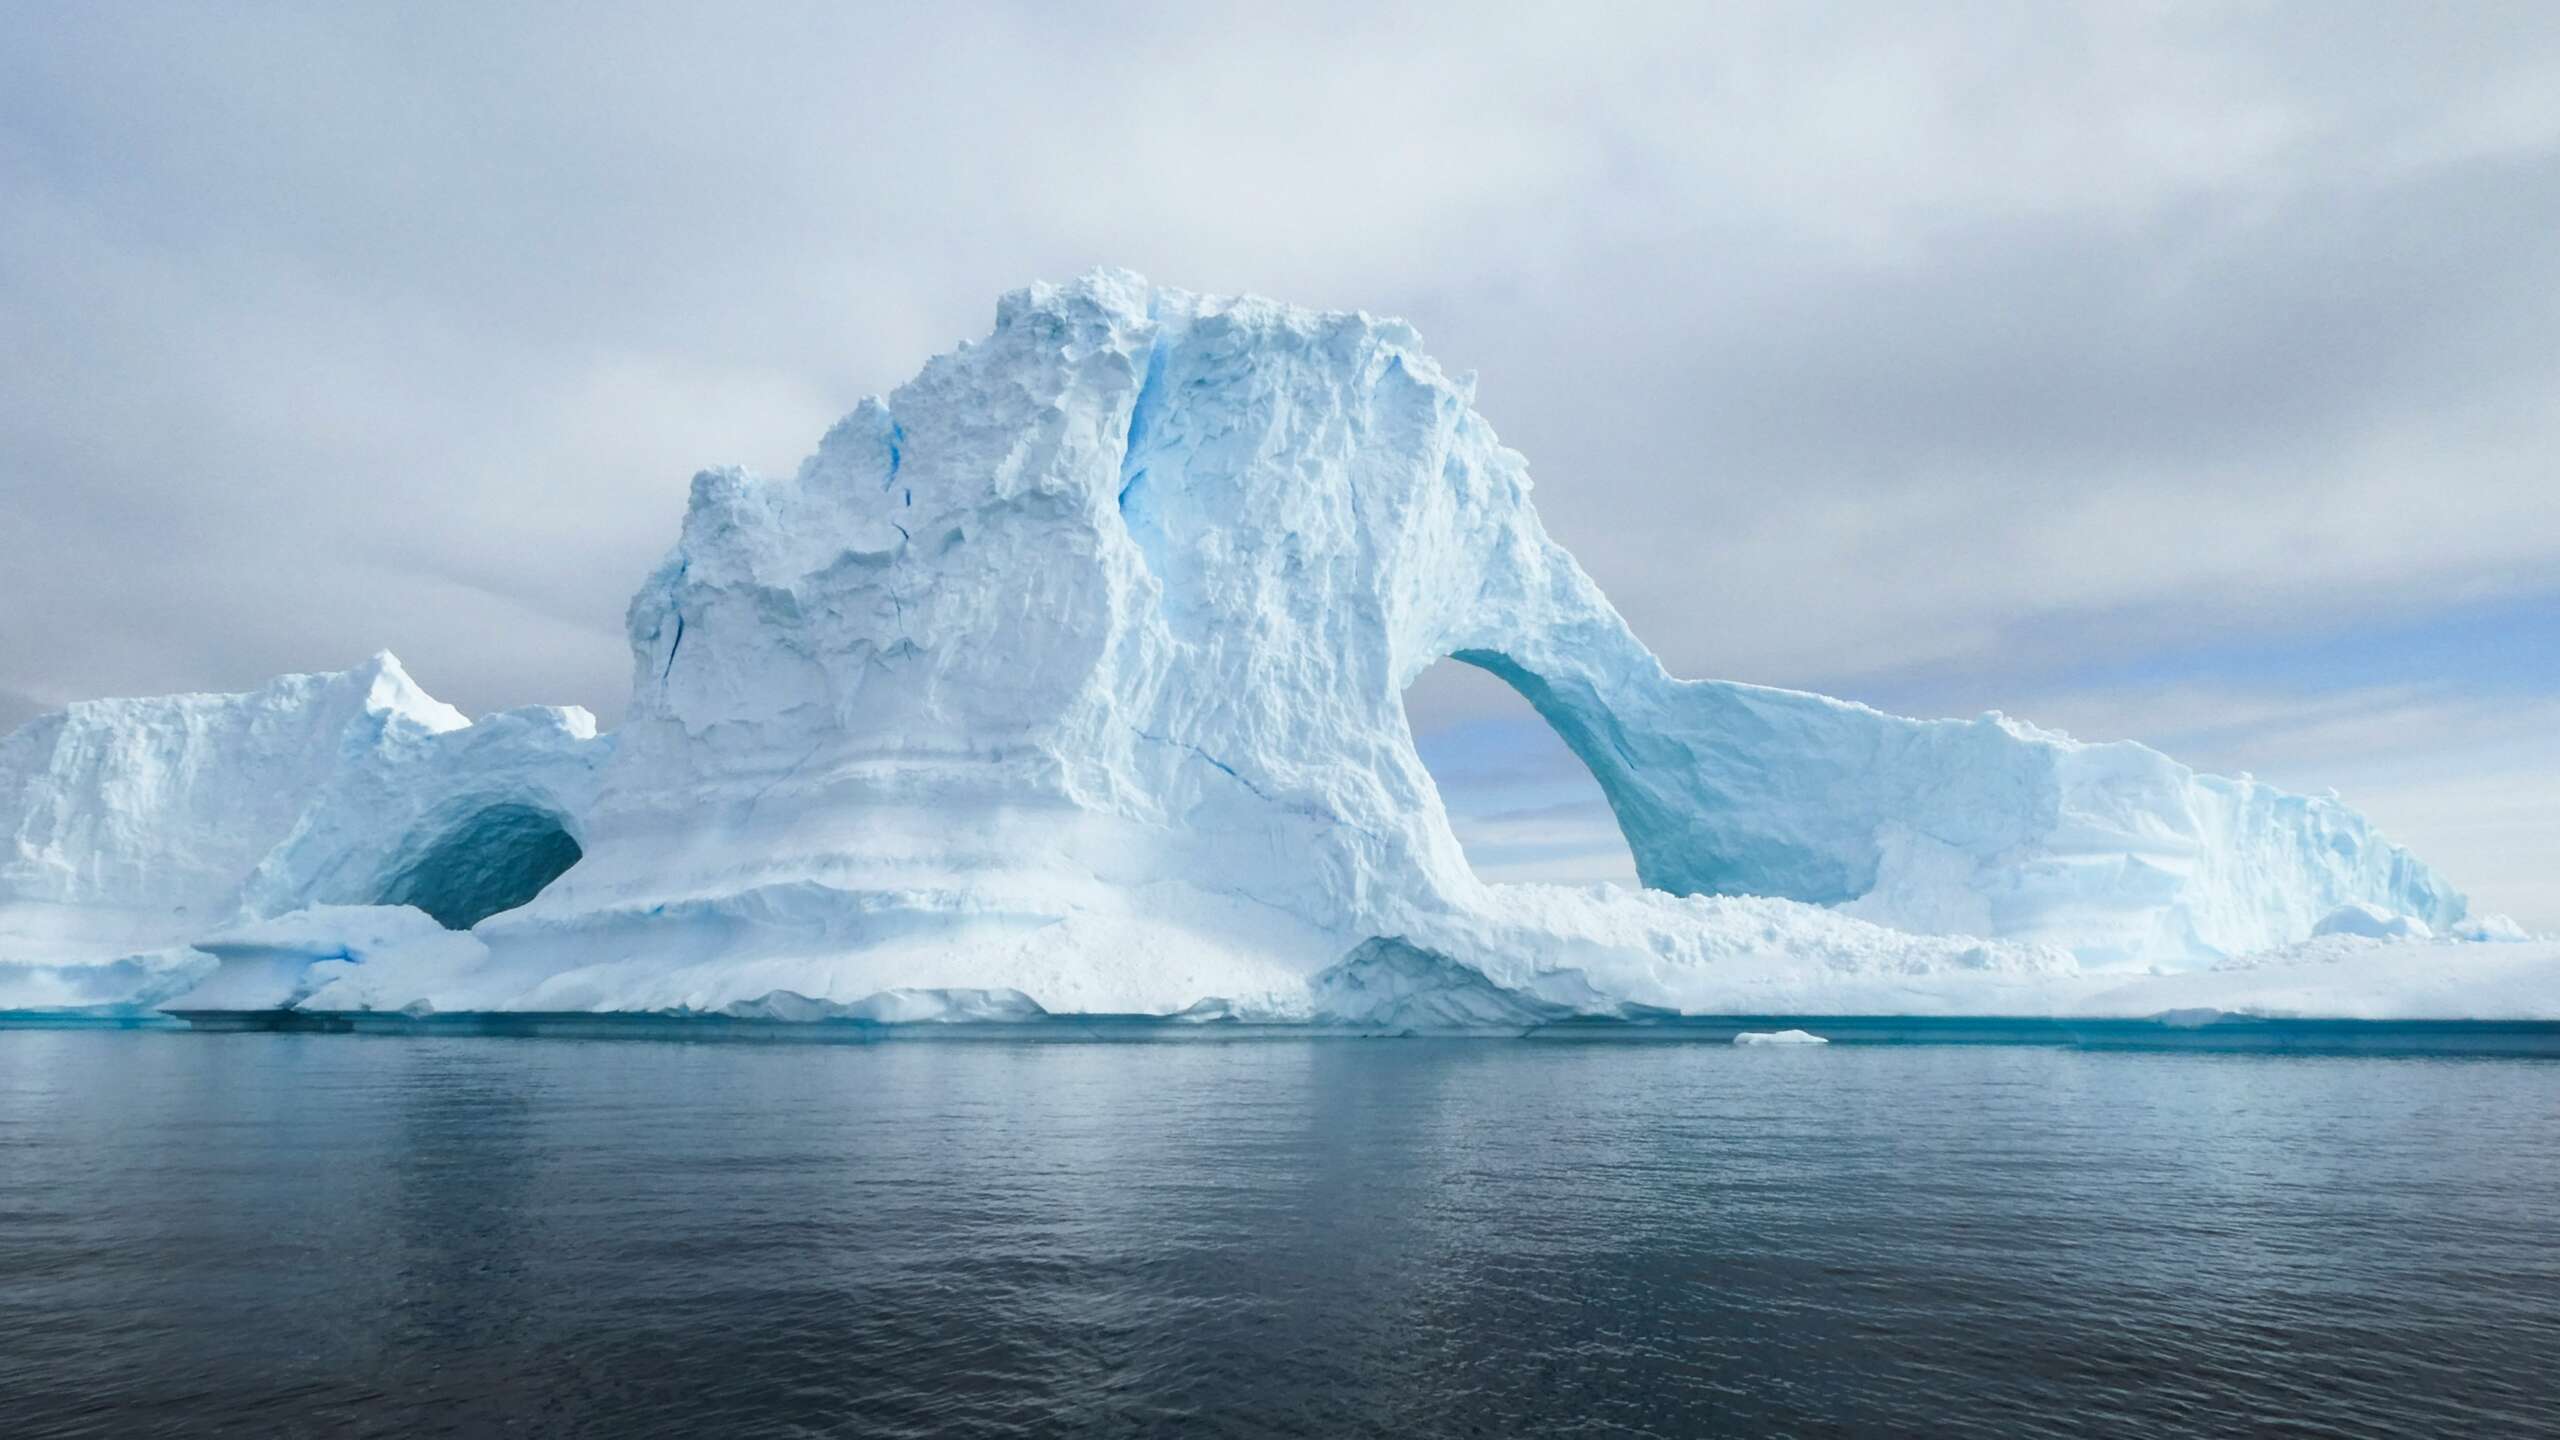 An image of an icy area in Antarctica.